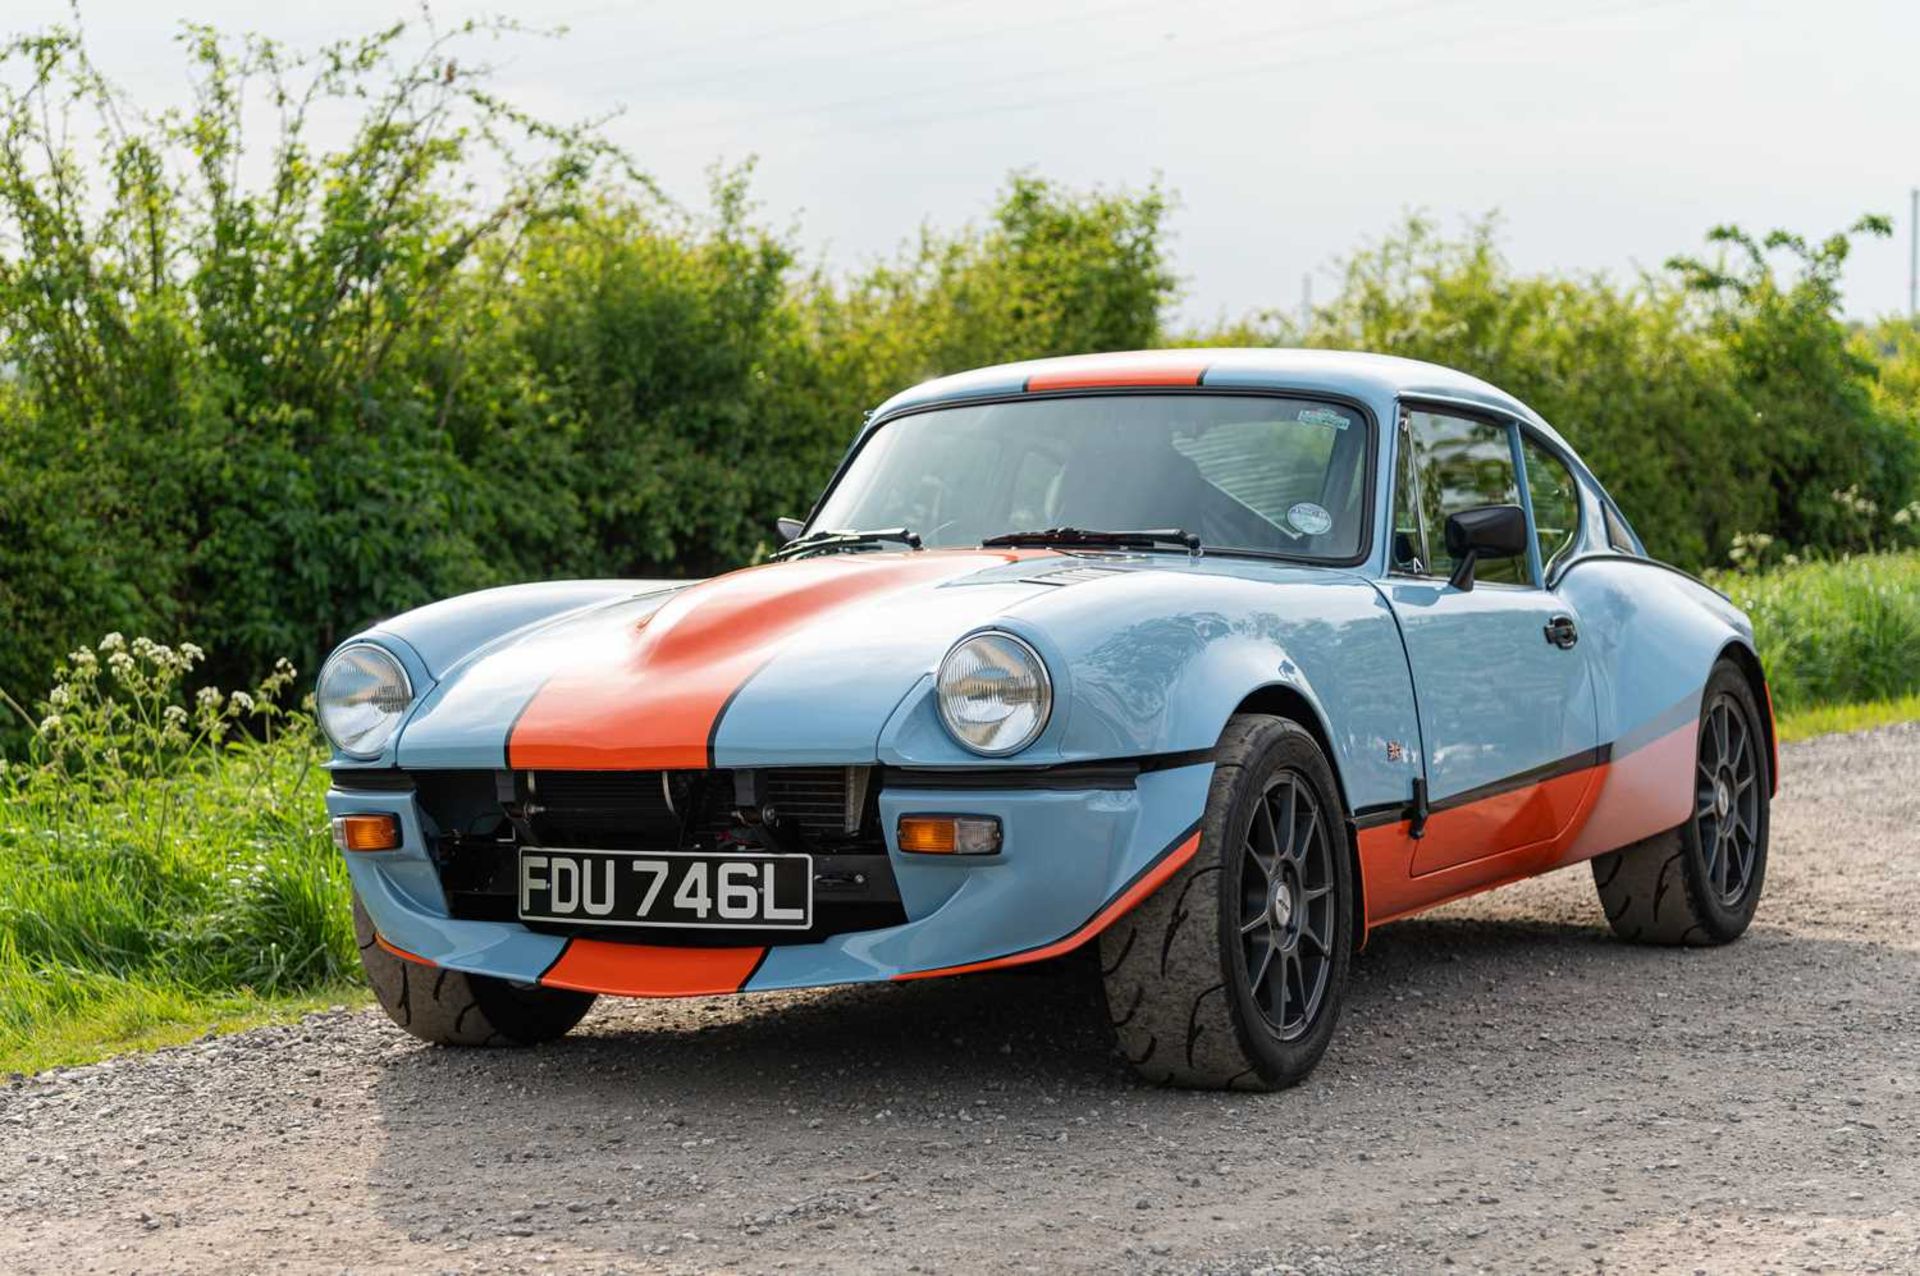 1973 Triumph GT6  ***NO RESERVE*** Presented in Gulf Racing-inspired paintwork, road-going track wea - Bild 6 aus 65